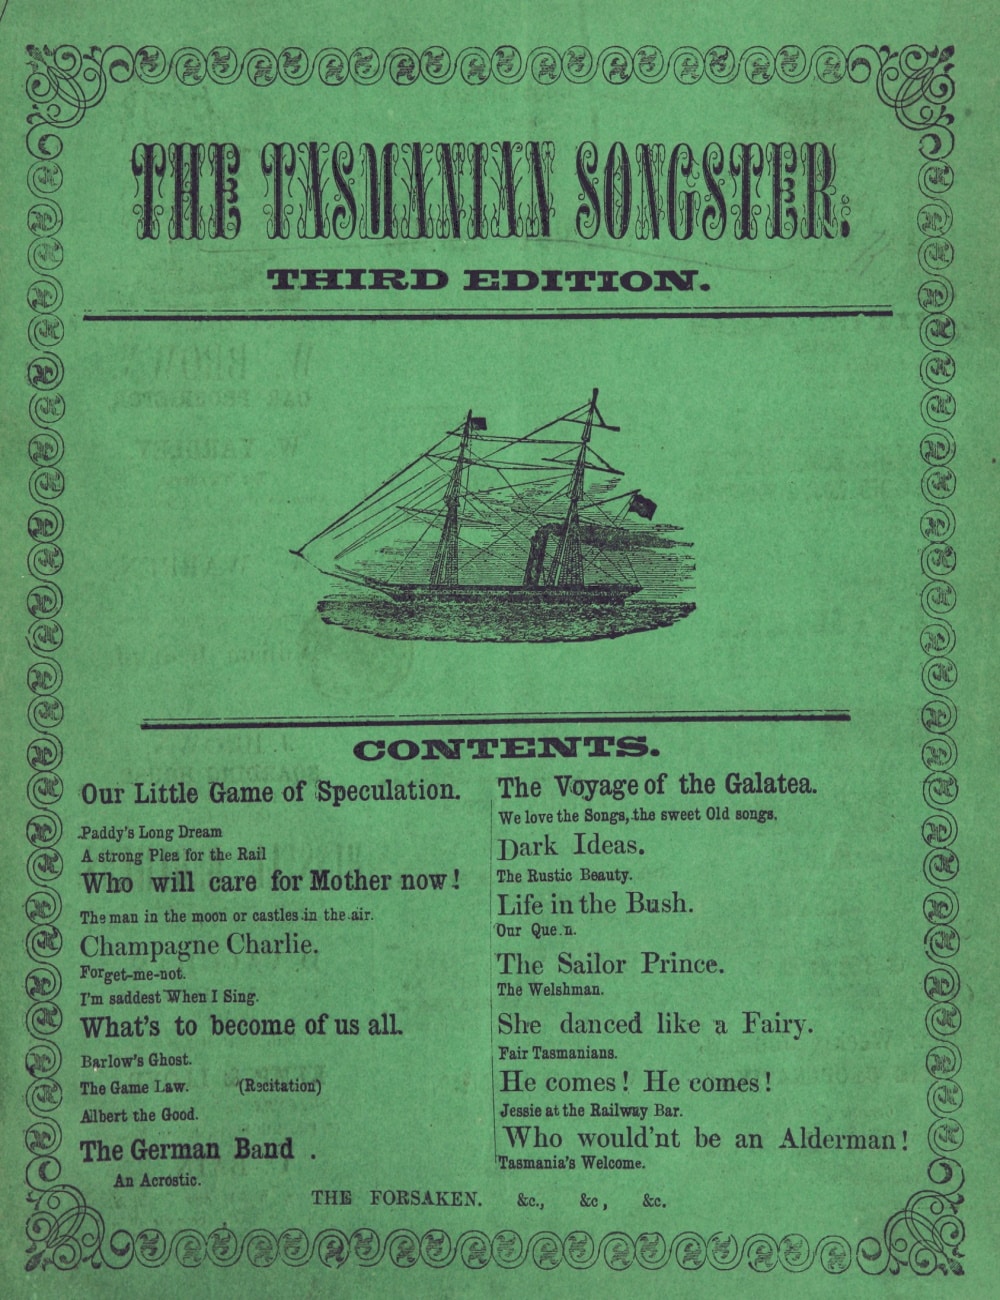 The Tasmanian songster, 3rd edition ([Hobart]: Marryat Hornsby, [? 1867-68])